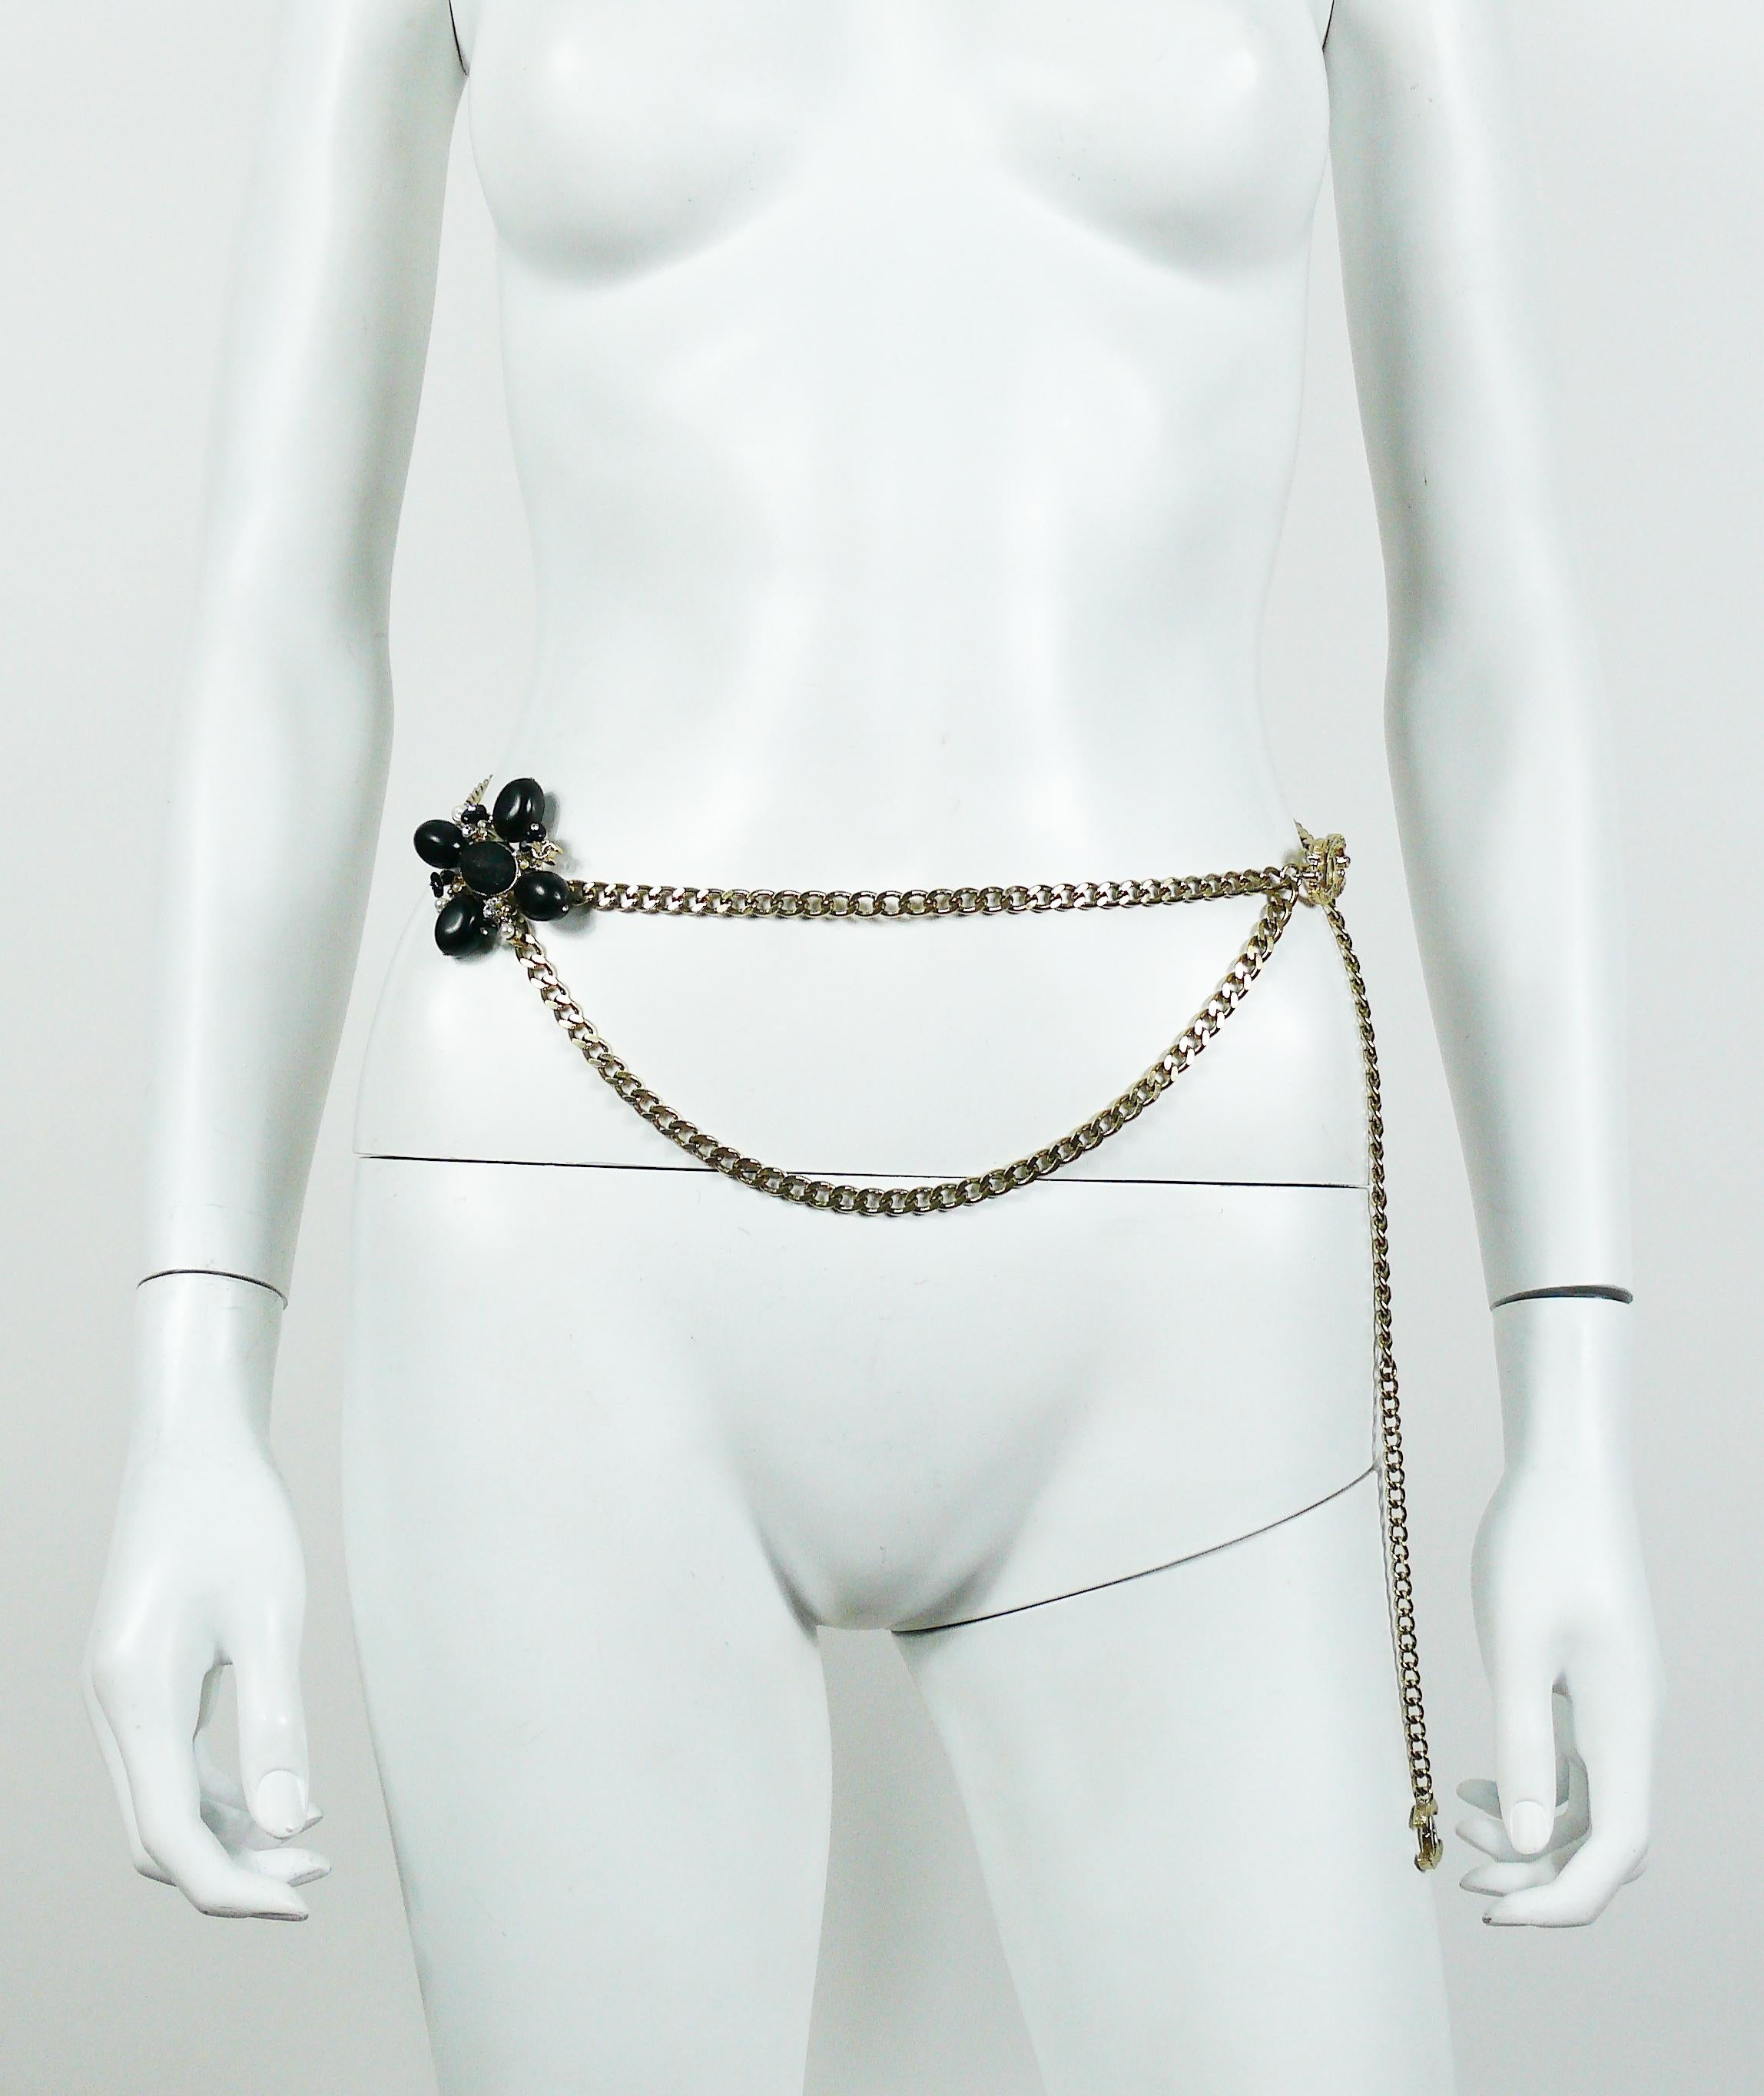 CHANEL light gold toned double chain belt adorned with a stylized black clover featuring large olive shaped resin cabochons, clear crystals, faux pearls, black/grey boucle tweed center and CC logo. CC logo drop at the end of the chain and CC logo